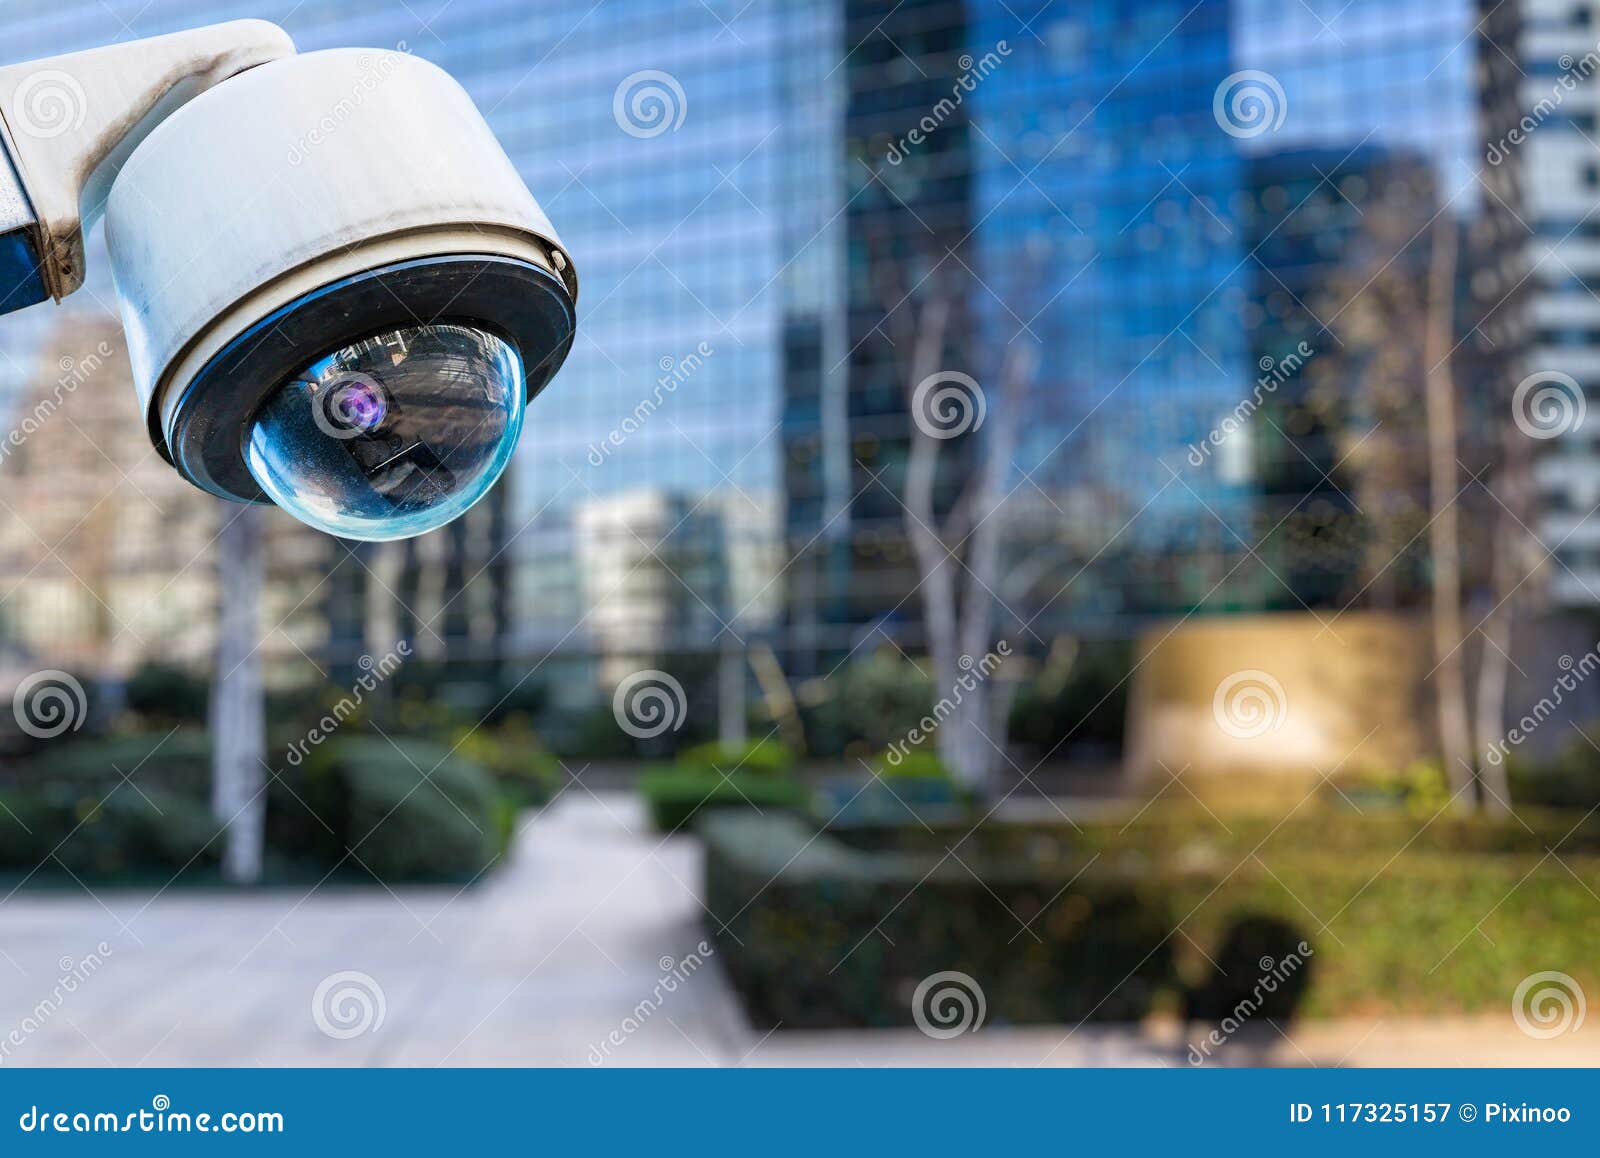 security cctv camera or surveillance system with buildings on blurry background